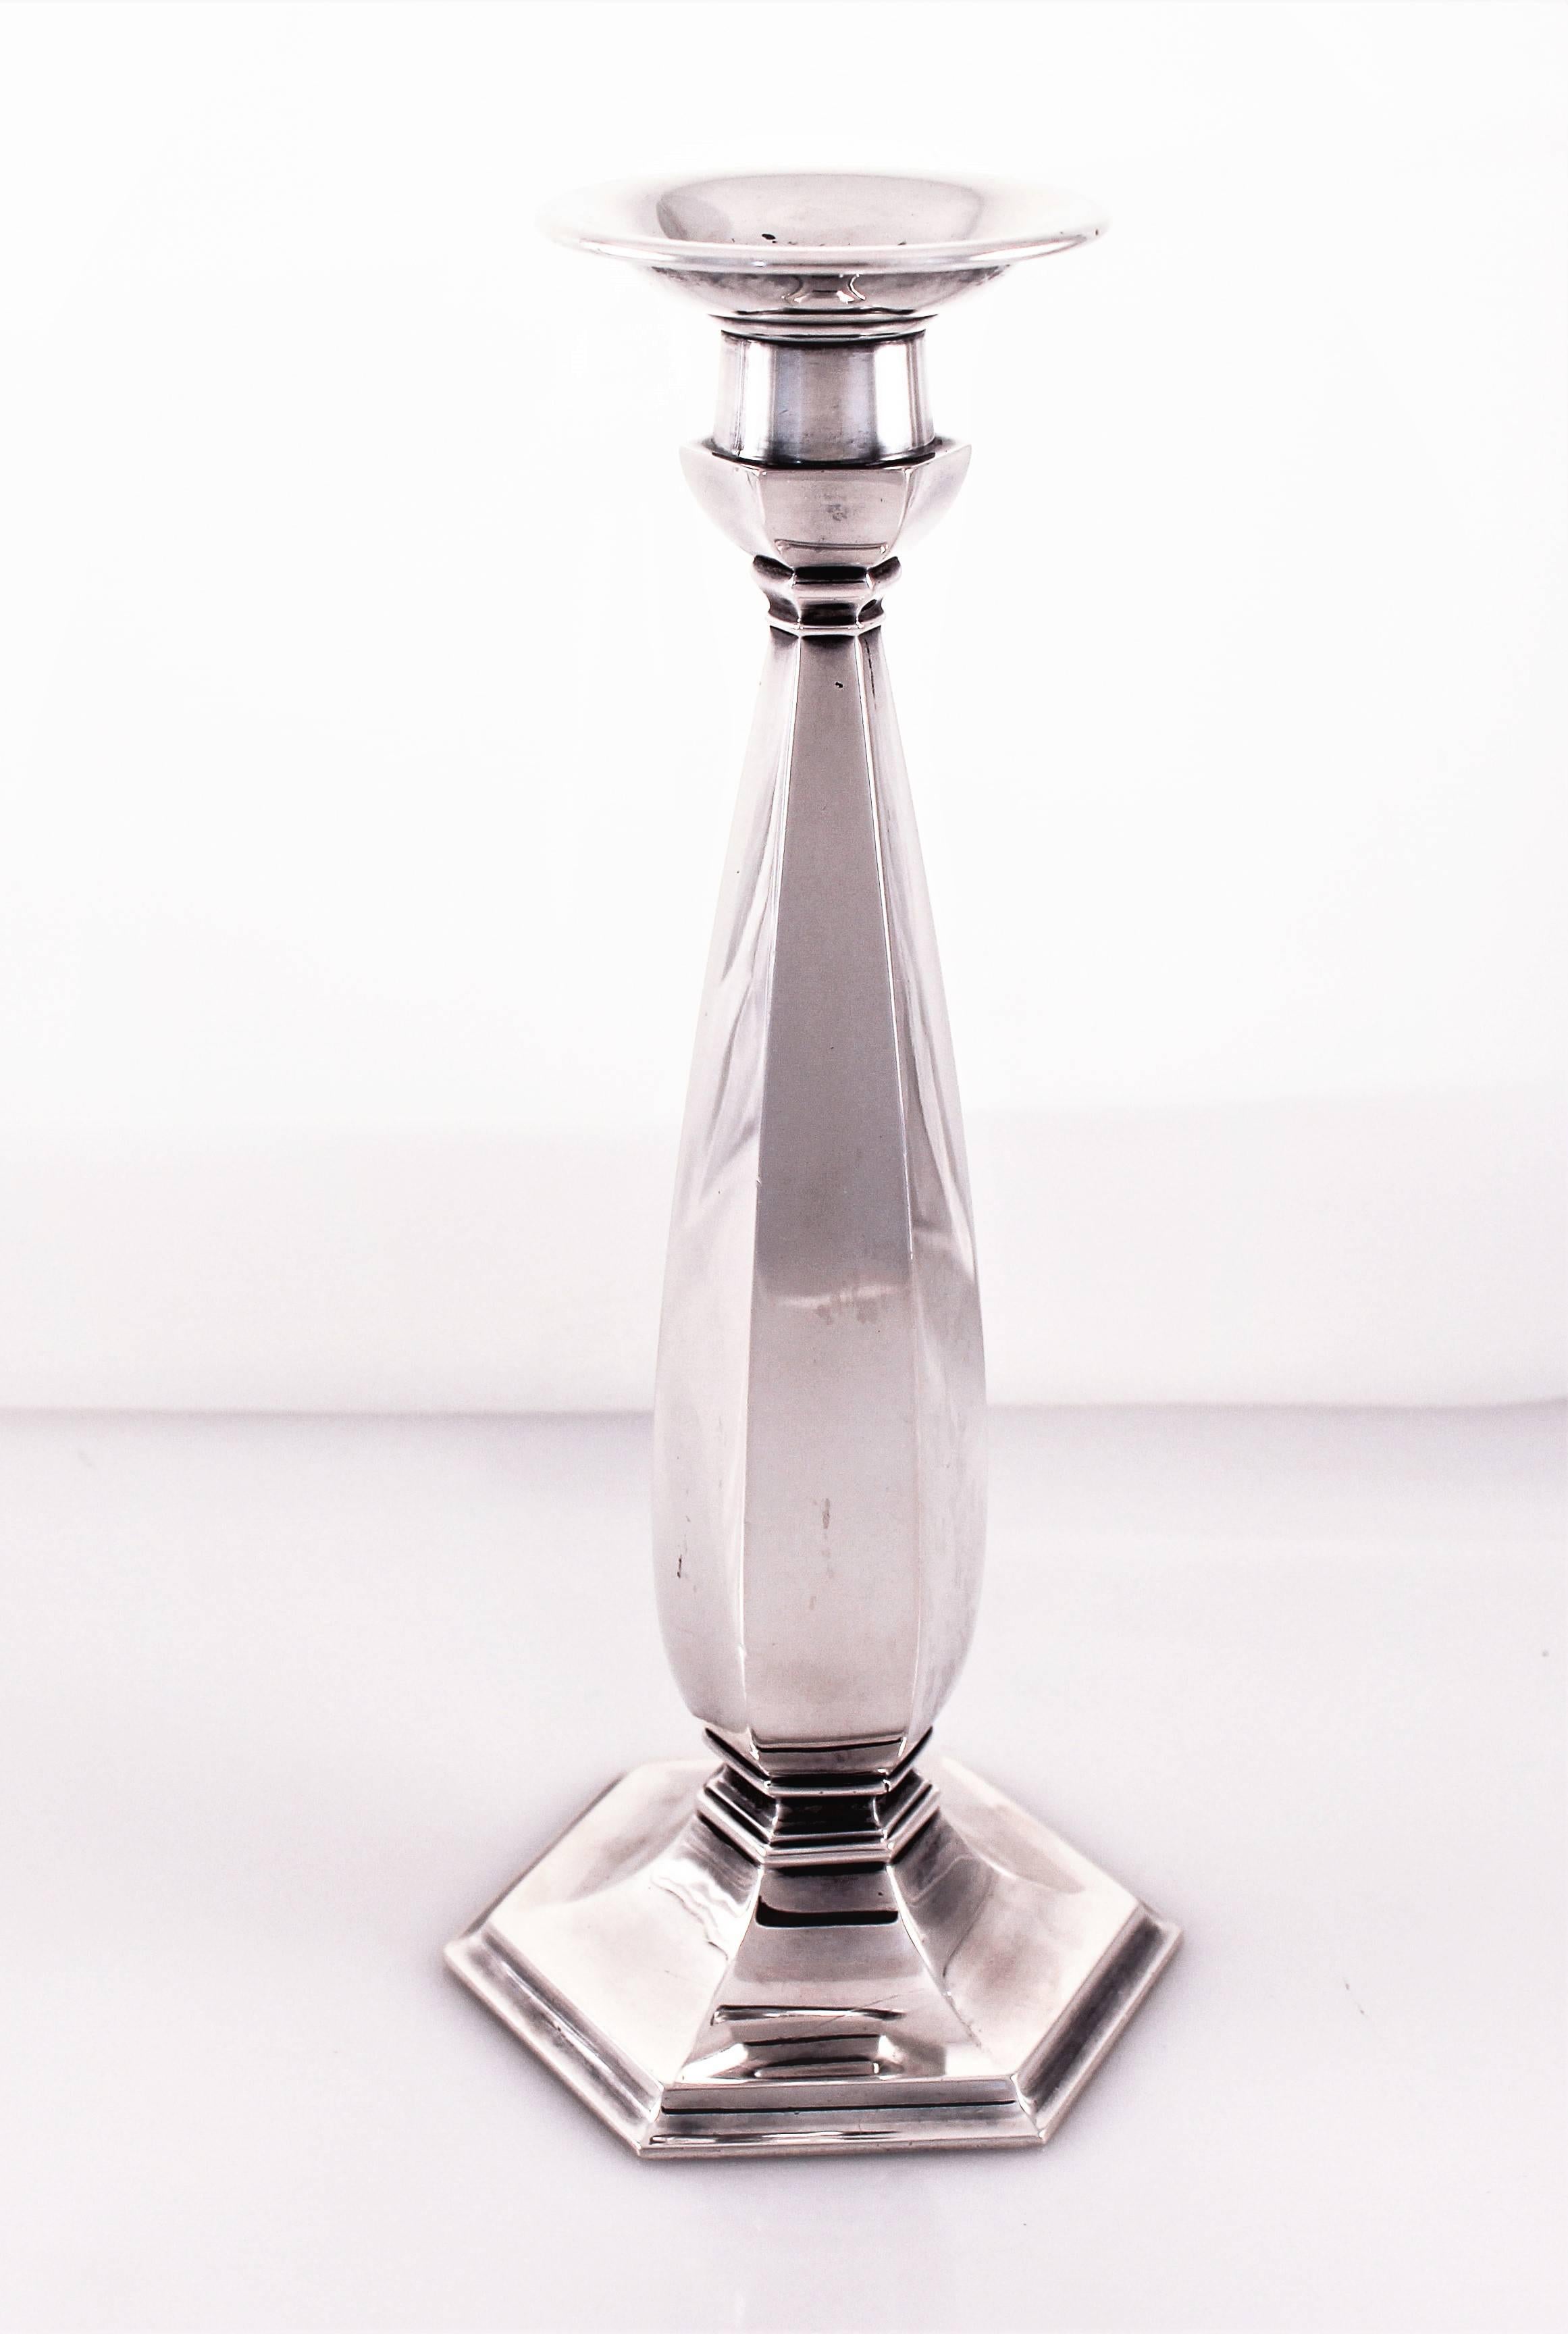 These candlesticks have an octangular body and base, giving these otherwise ordinary candlesticks a tailored smart look.
 